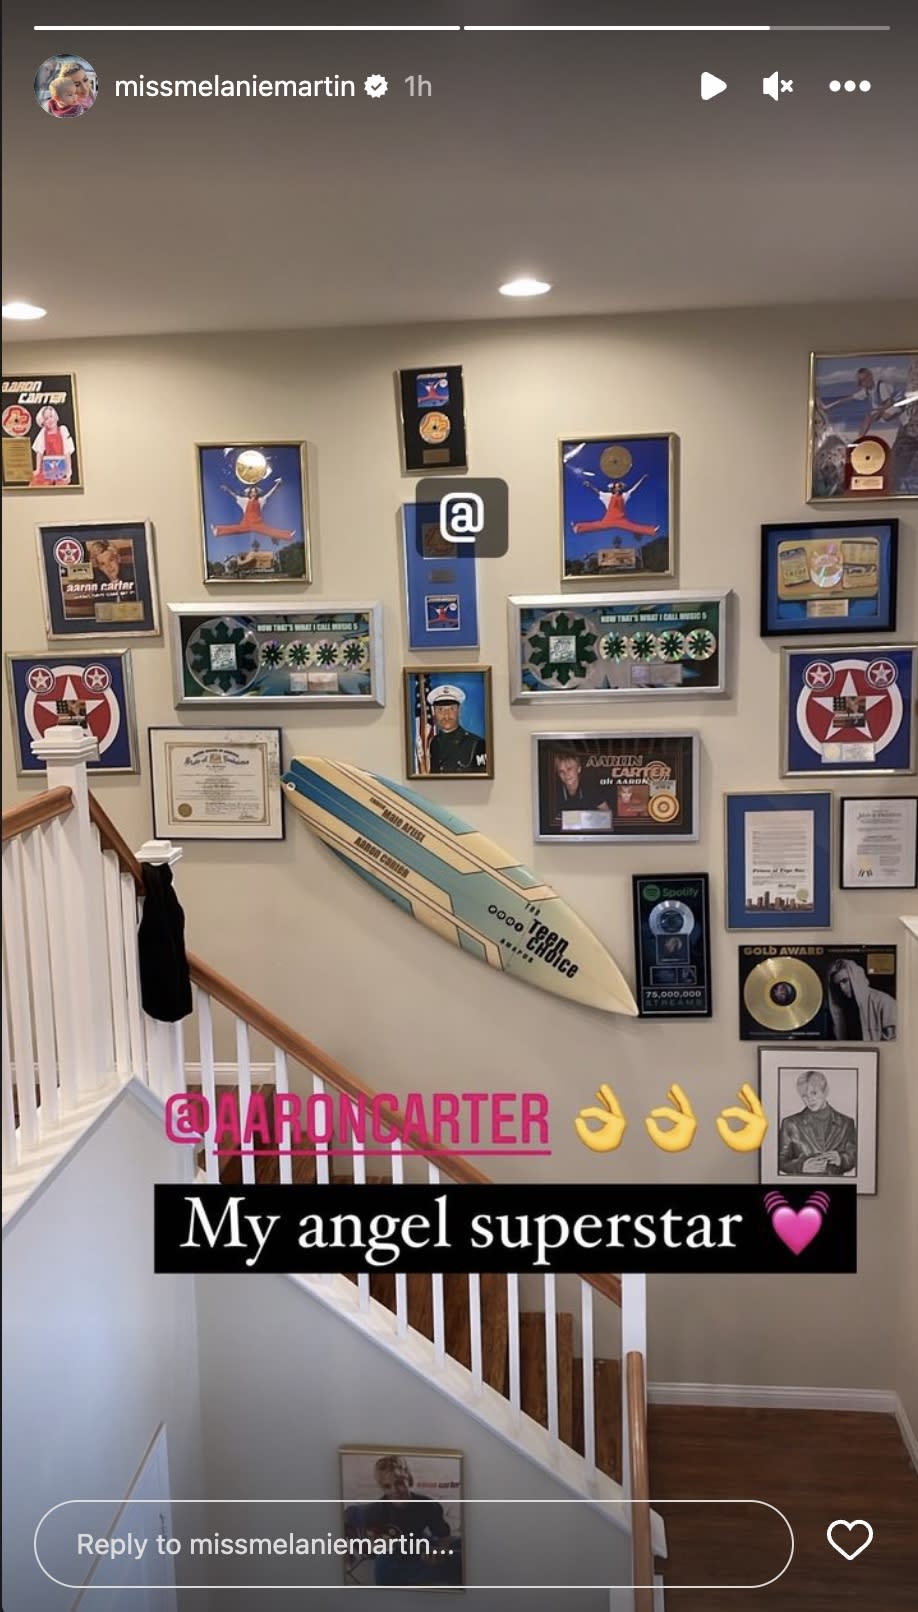 An image of a stairway in a residence hung with Aaron Carter memorabilia, including a surfboard, with a superscription saying: @AARONCARTER, My angel superstar.